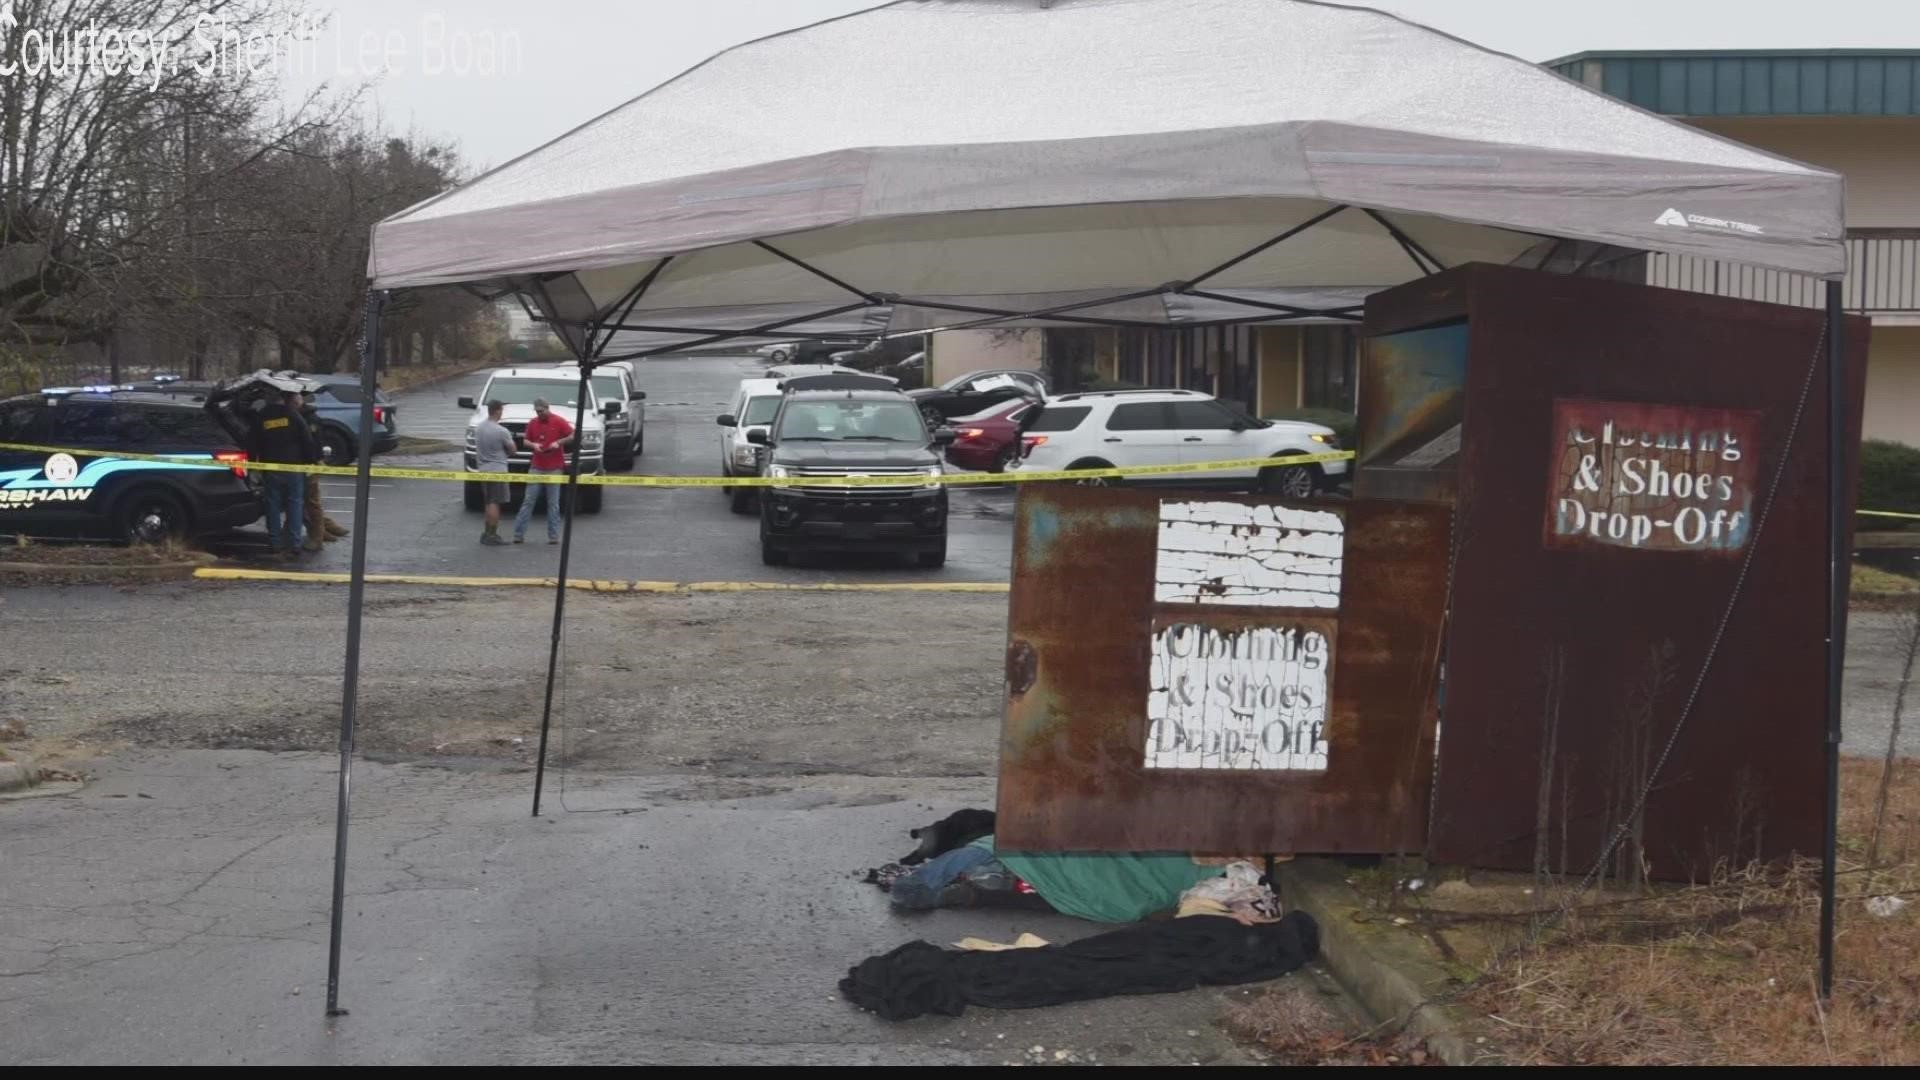 What's believed to be a woman's body was found inside a donation bin in Kershaw County, South Carolina.